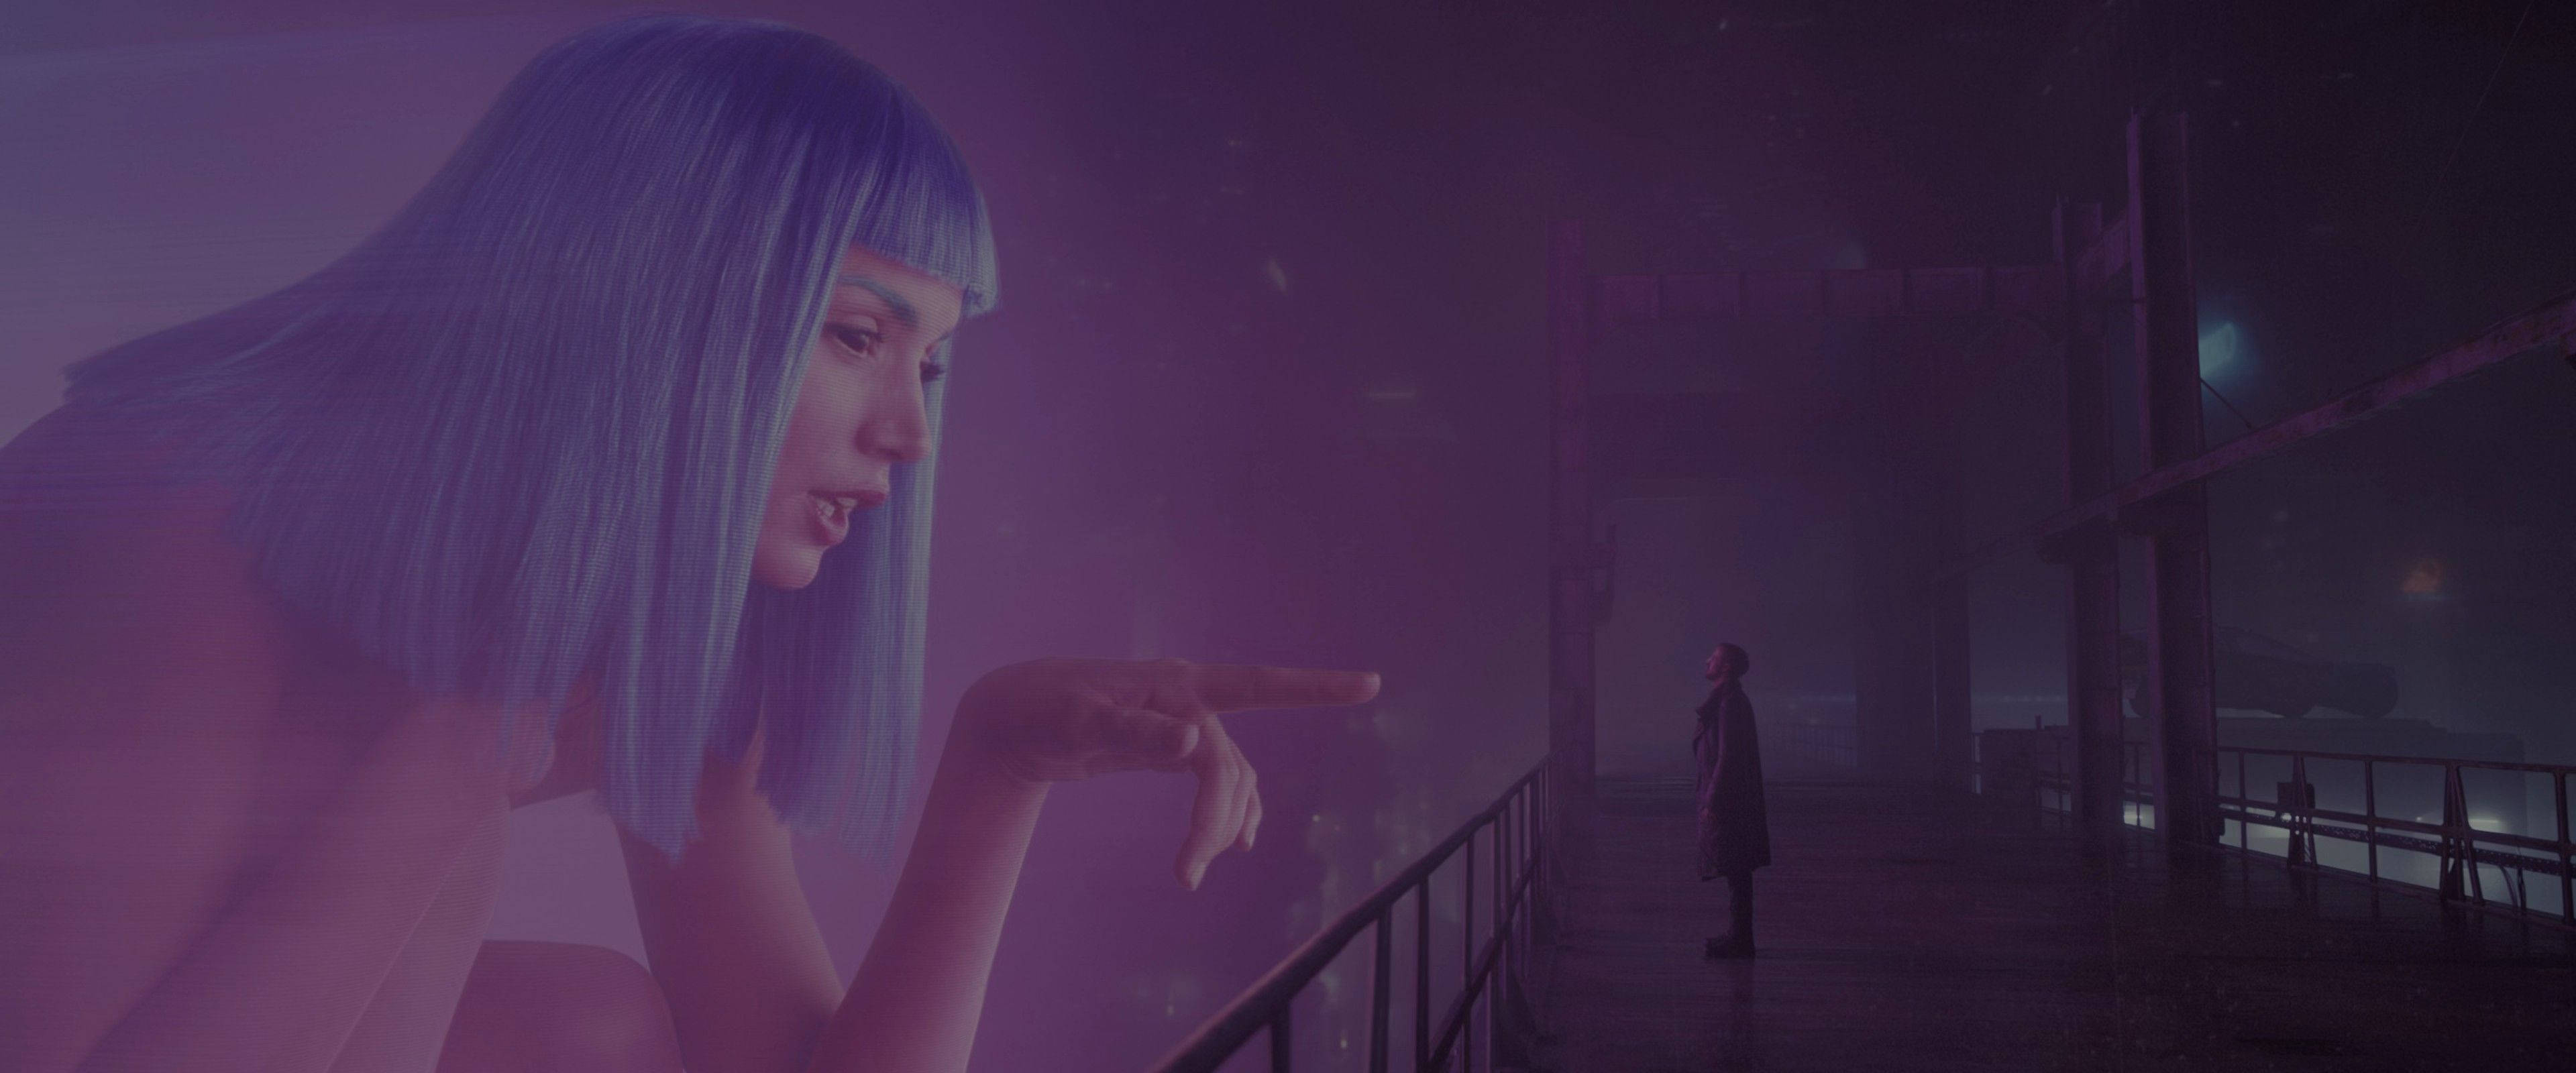 1920x1080 Blade Runner 2049 Still 1080P Laptop Full HD Wallpaper HD Movies  4K Wallpapers Images Photos and Background  Wallpapers Den